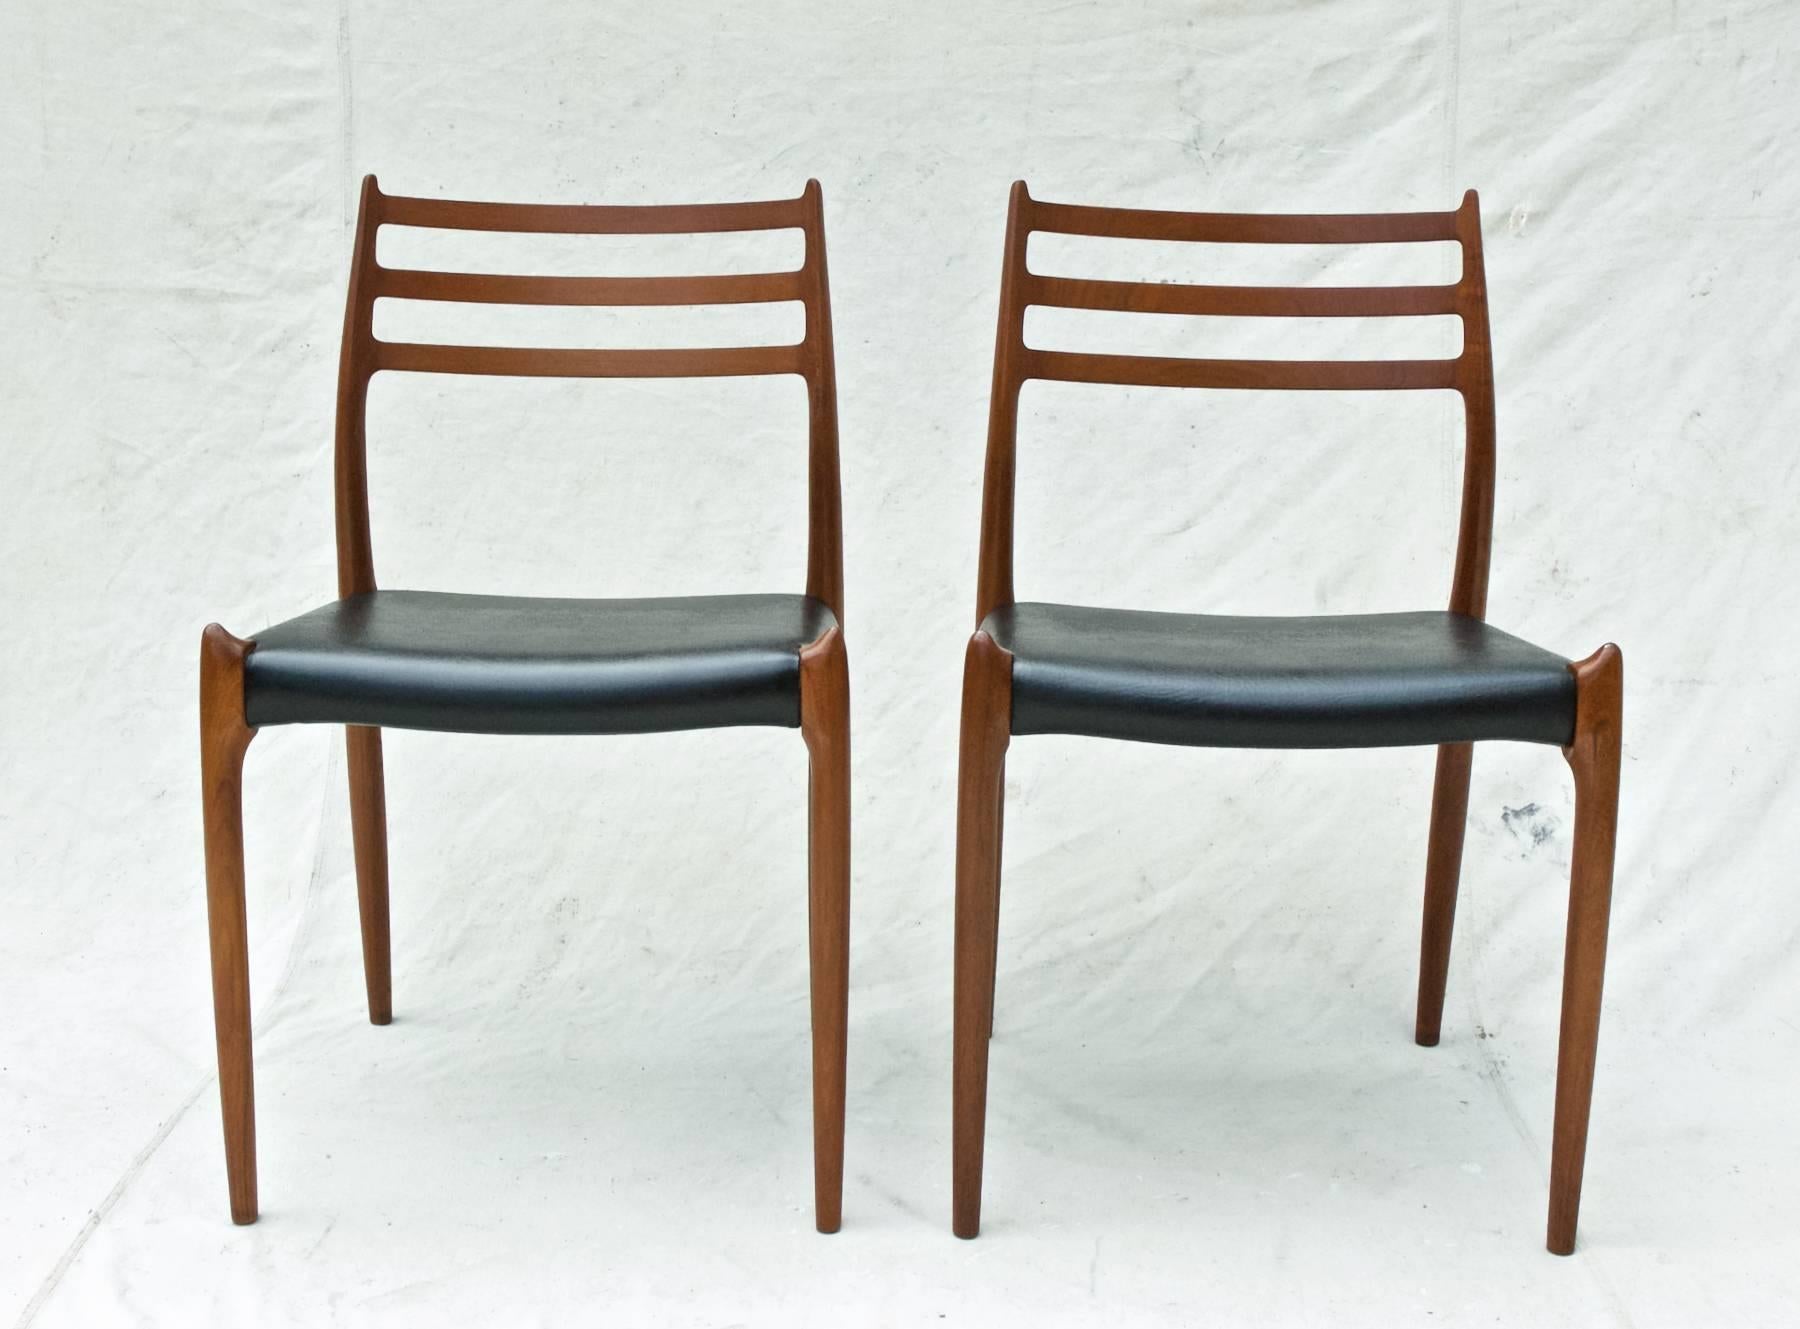 A fine pair of model 78 dining chairs by N.O. Moller. The gorgeous and sculptural Danish Modern chairs are in excellent structural condition throughout and possess a richness of woodgrain that set them apart from other teak wood models of this